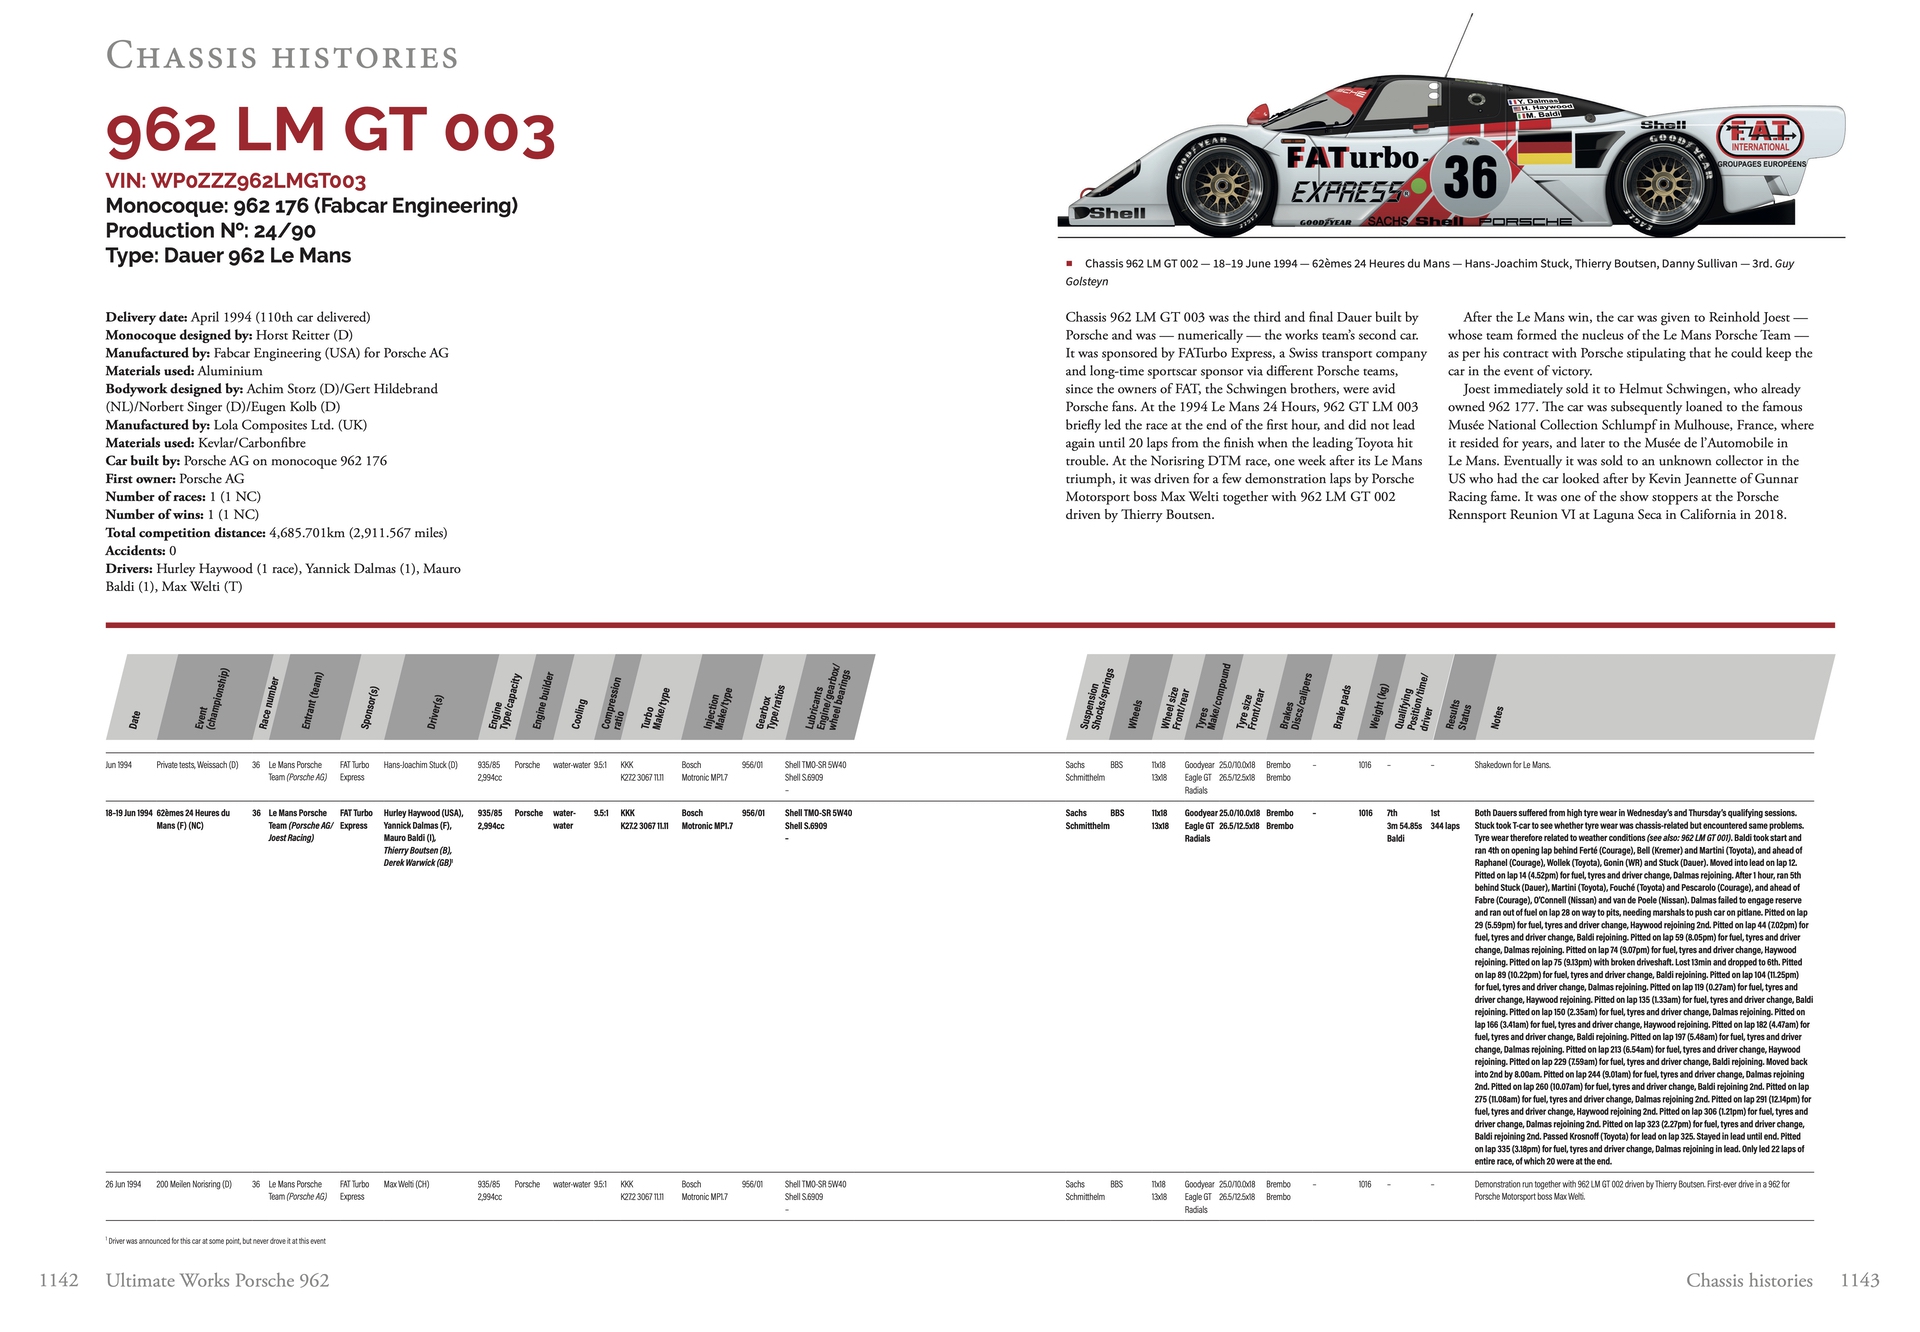 Page from Ultimate Works Porsche 962 - The Definitive History featuring Chassis LM GT 003